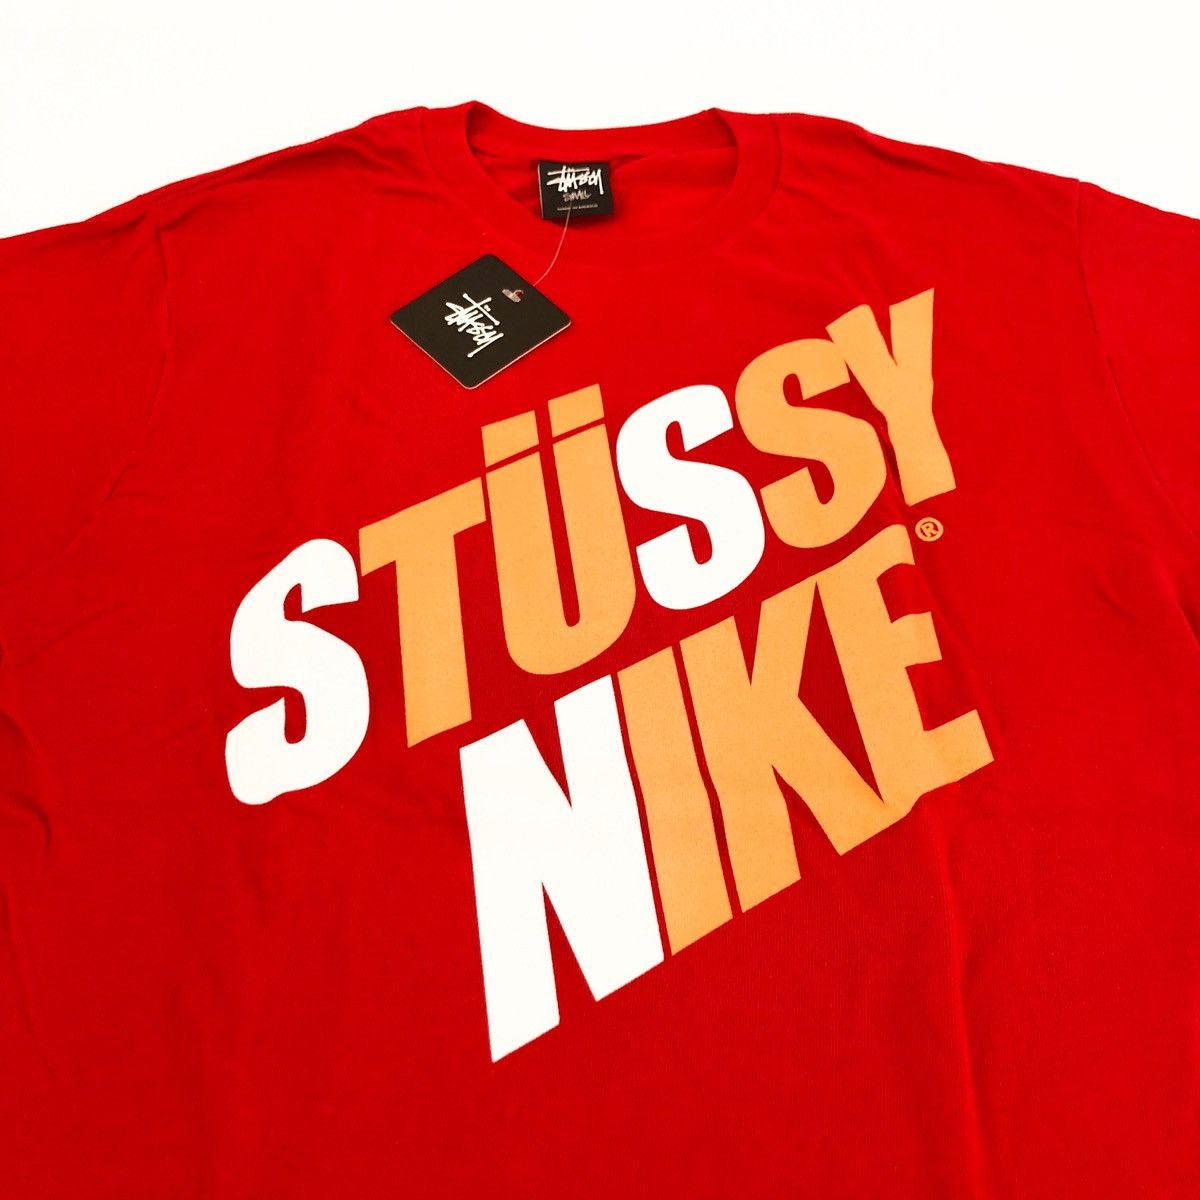 Nike DS 2012 Stussy x NIKE Off Mountain S&S Collection tee shirt